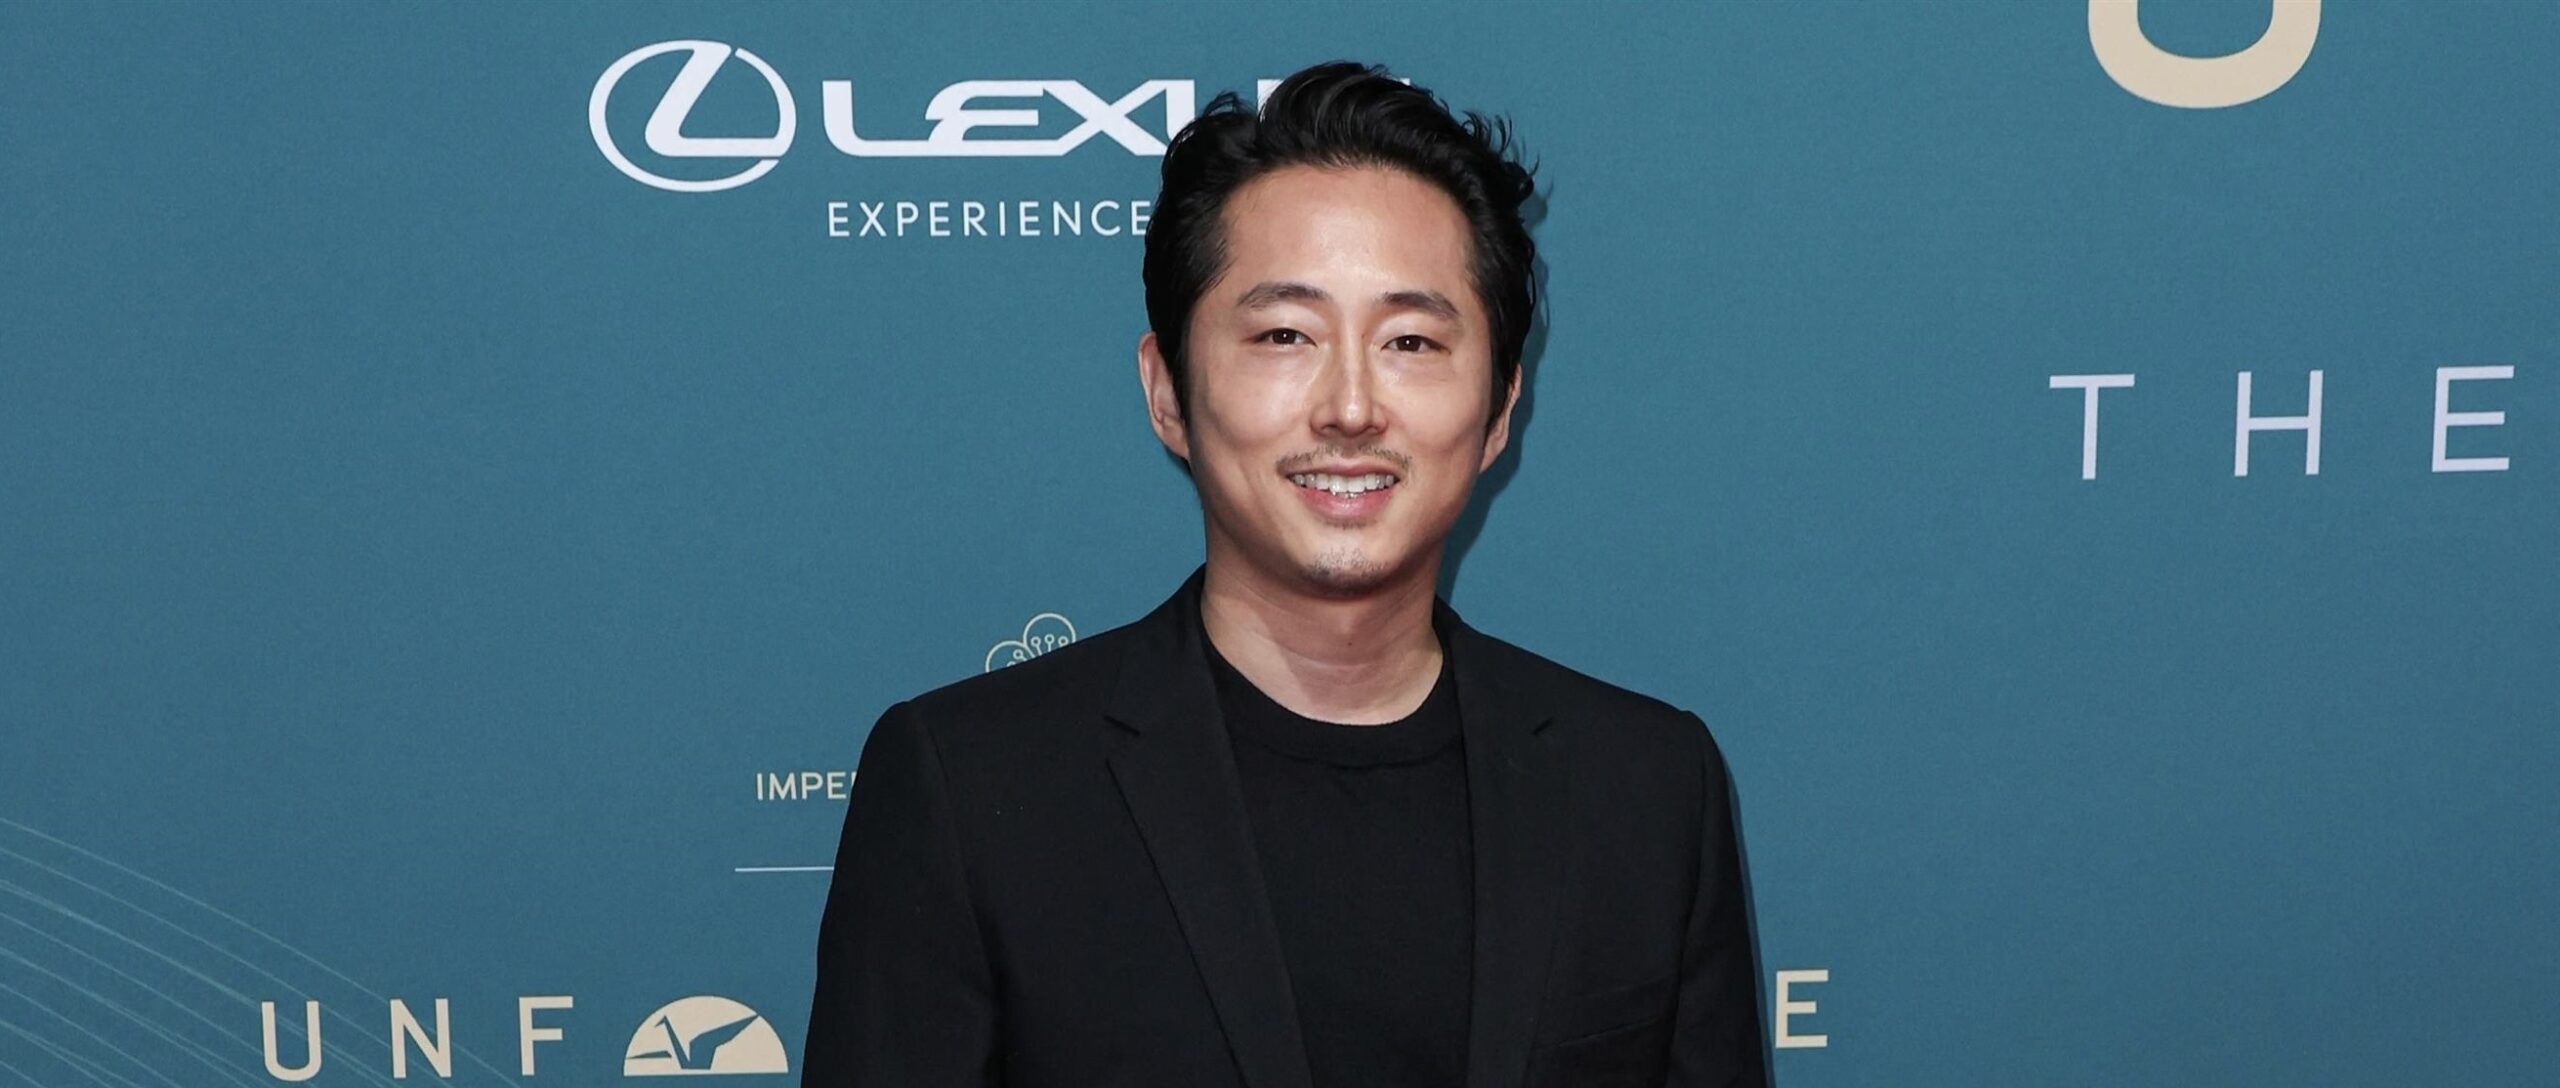 Actor Steven Yeun at the Unforgettable Gala Asian American Awards in Beverly Hills, dressed in an elegant all-black suit with a satin lapel, smiling on the red carpet.